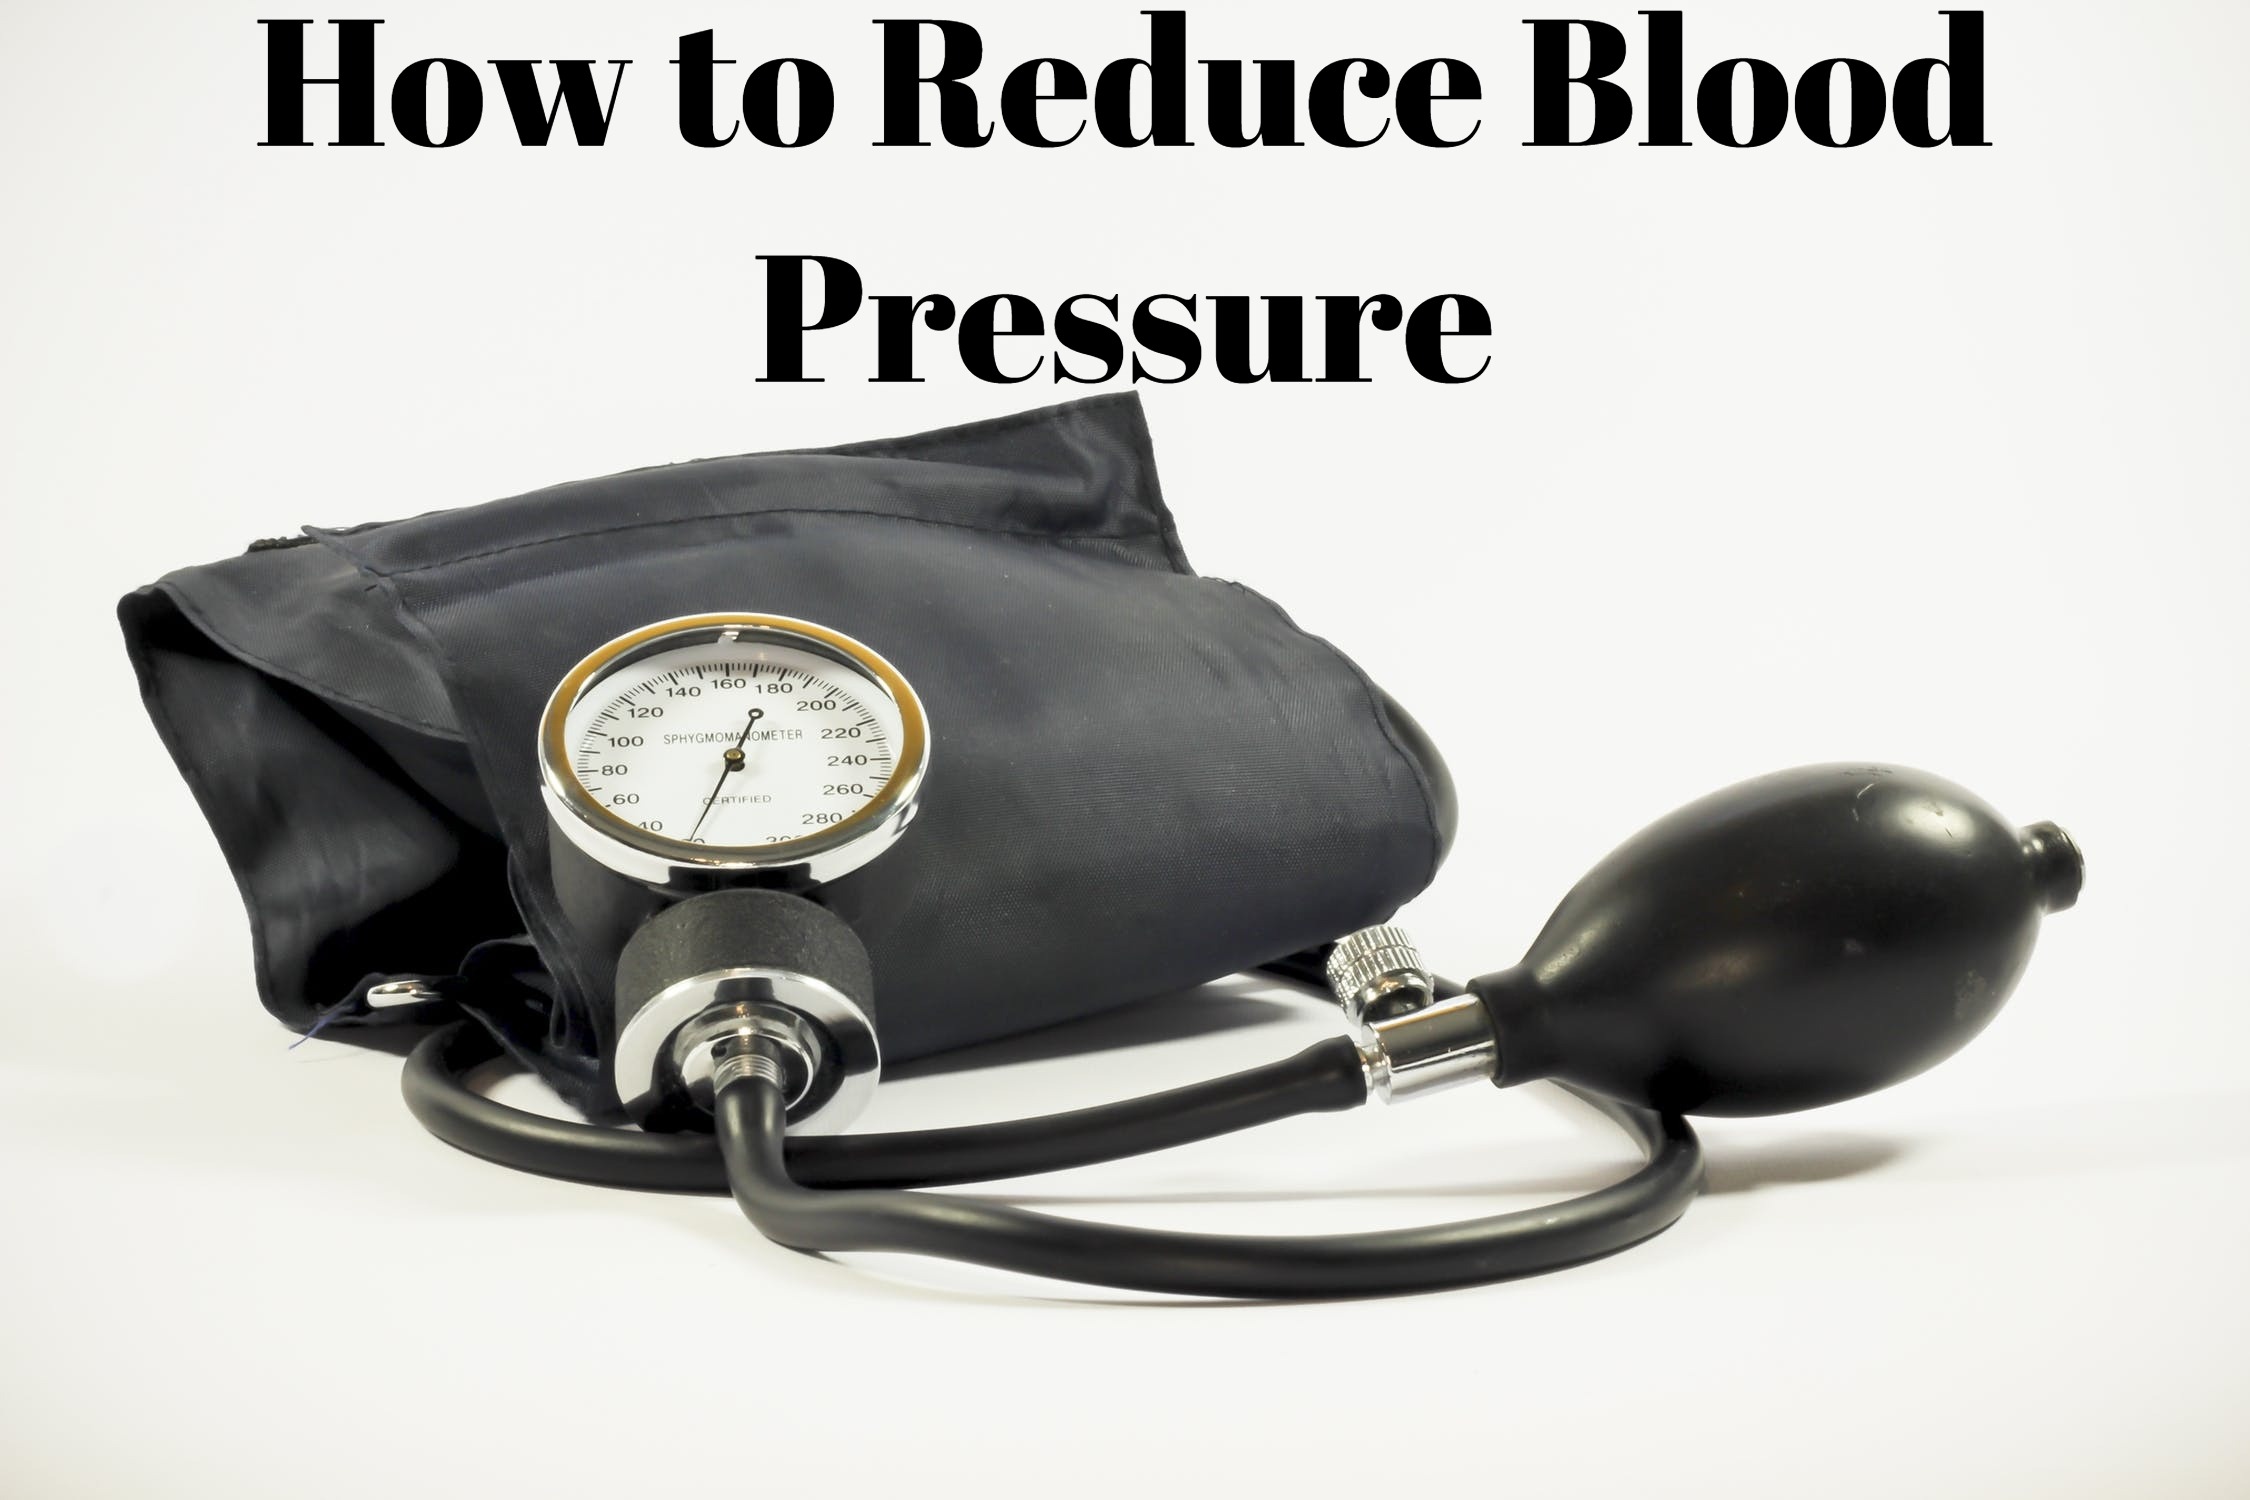 How to Reduce Blood Pressure